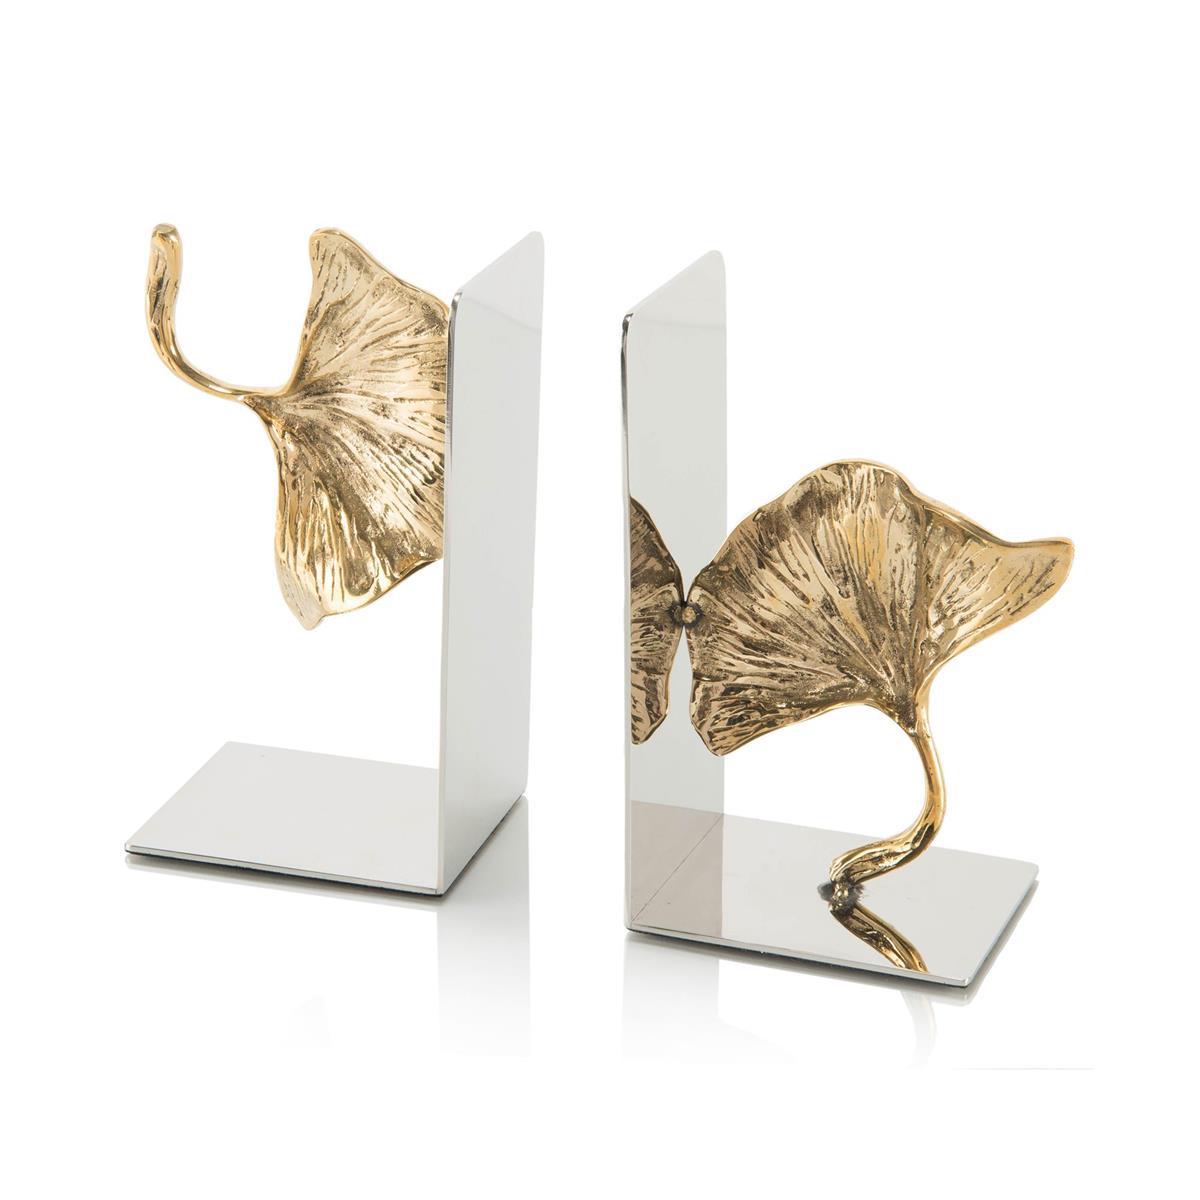 Pair of Ginkgo Leaf Bookends-John Richard-Office Accessories-Artistic Elements